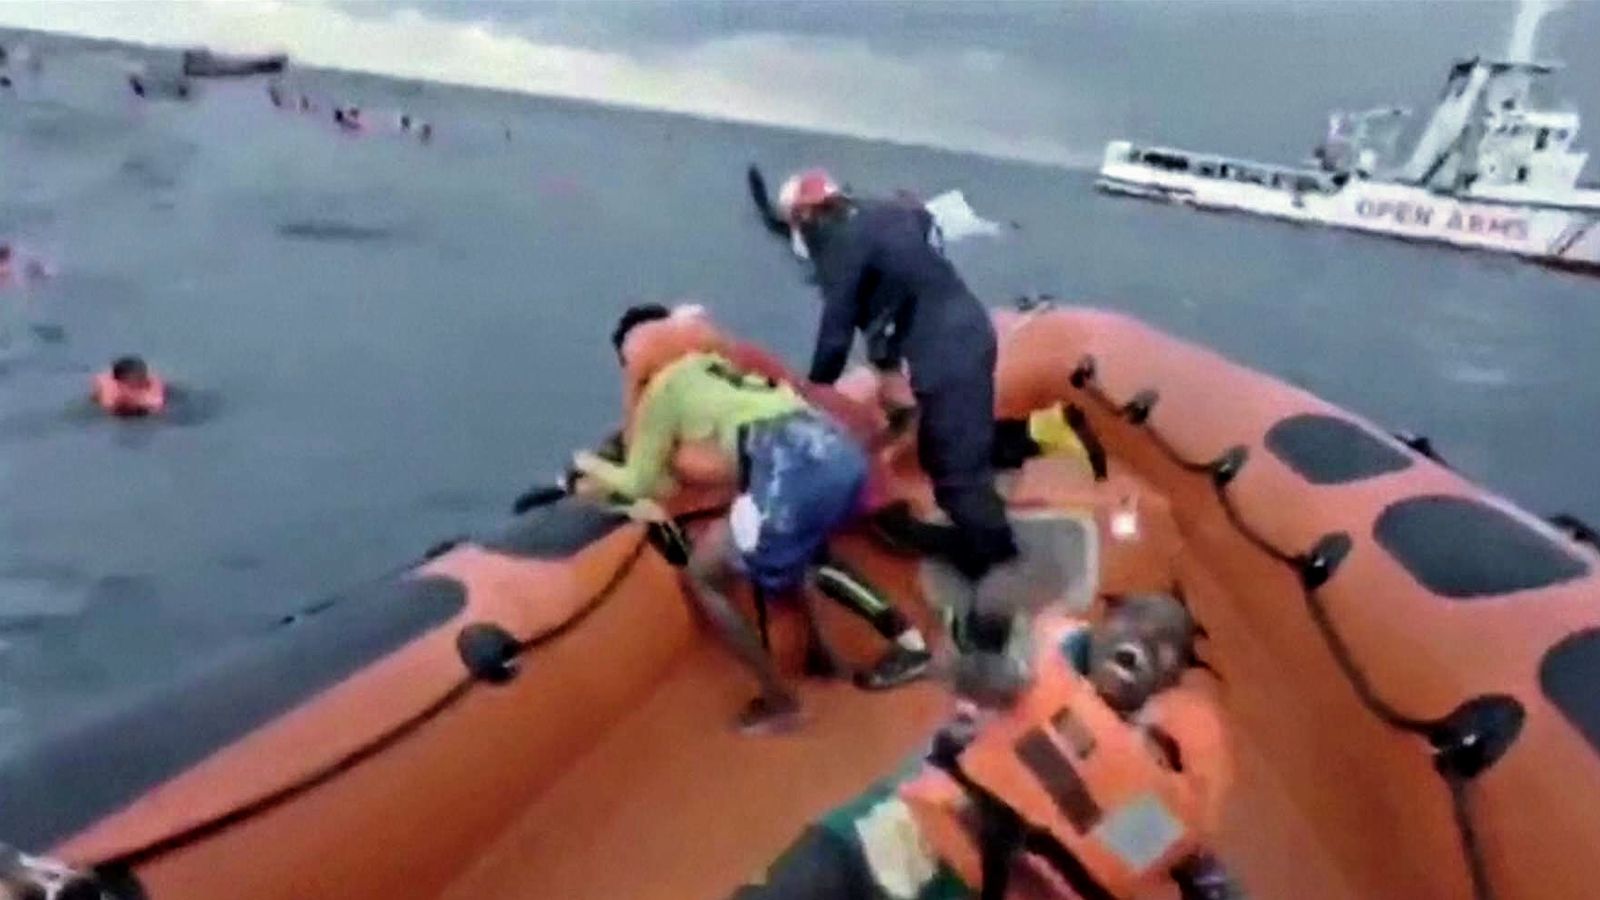 Migrant crisis: Desperate mother screams for lost baby as dinghy sinks - Sky News